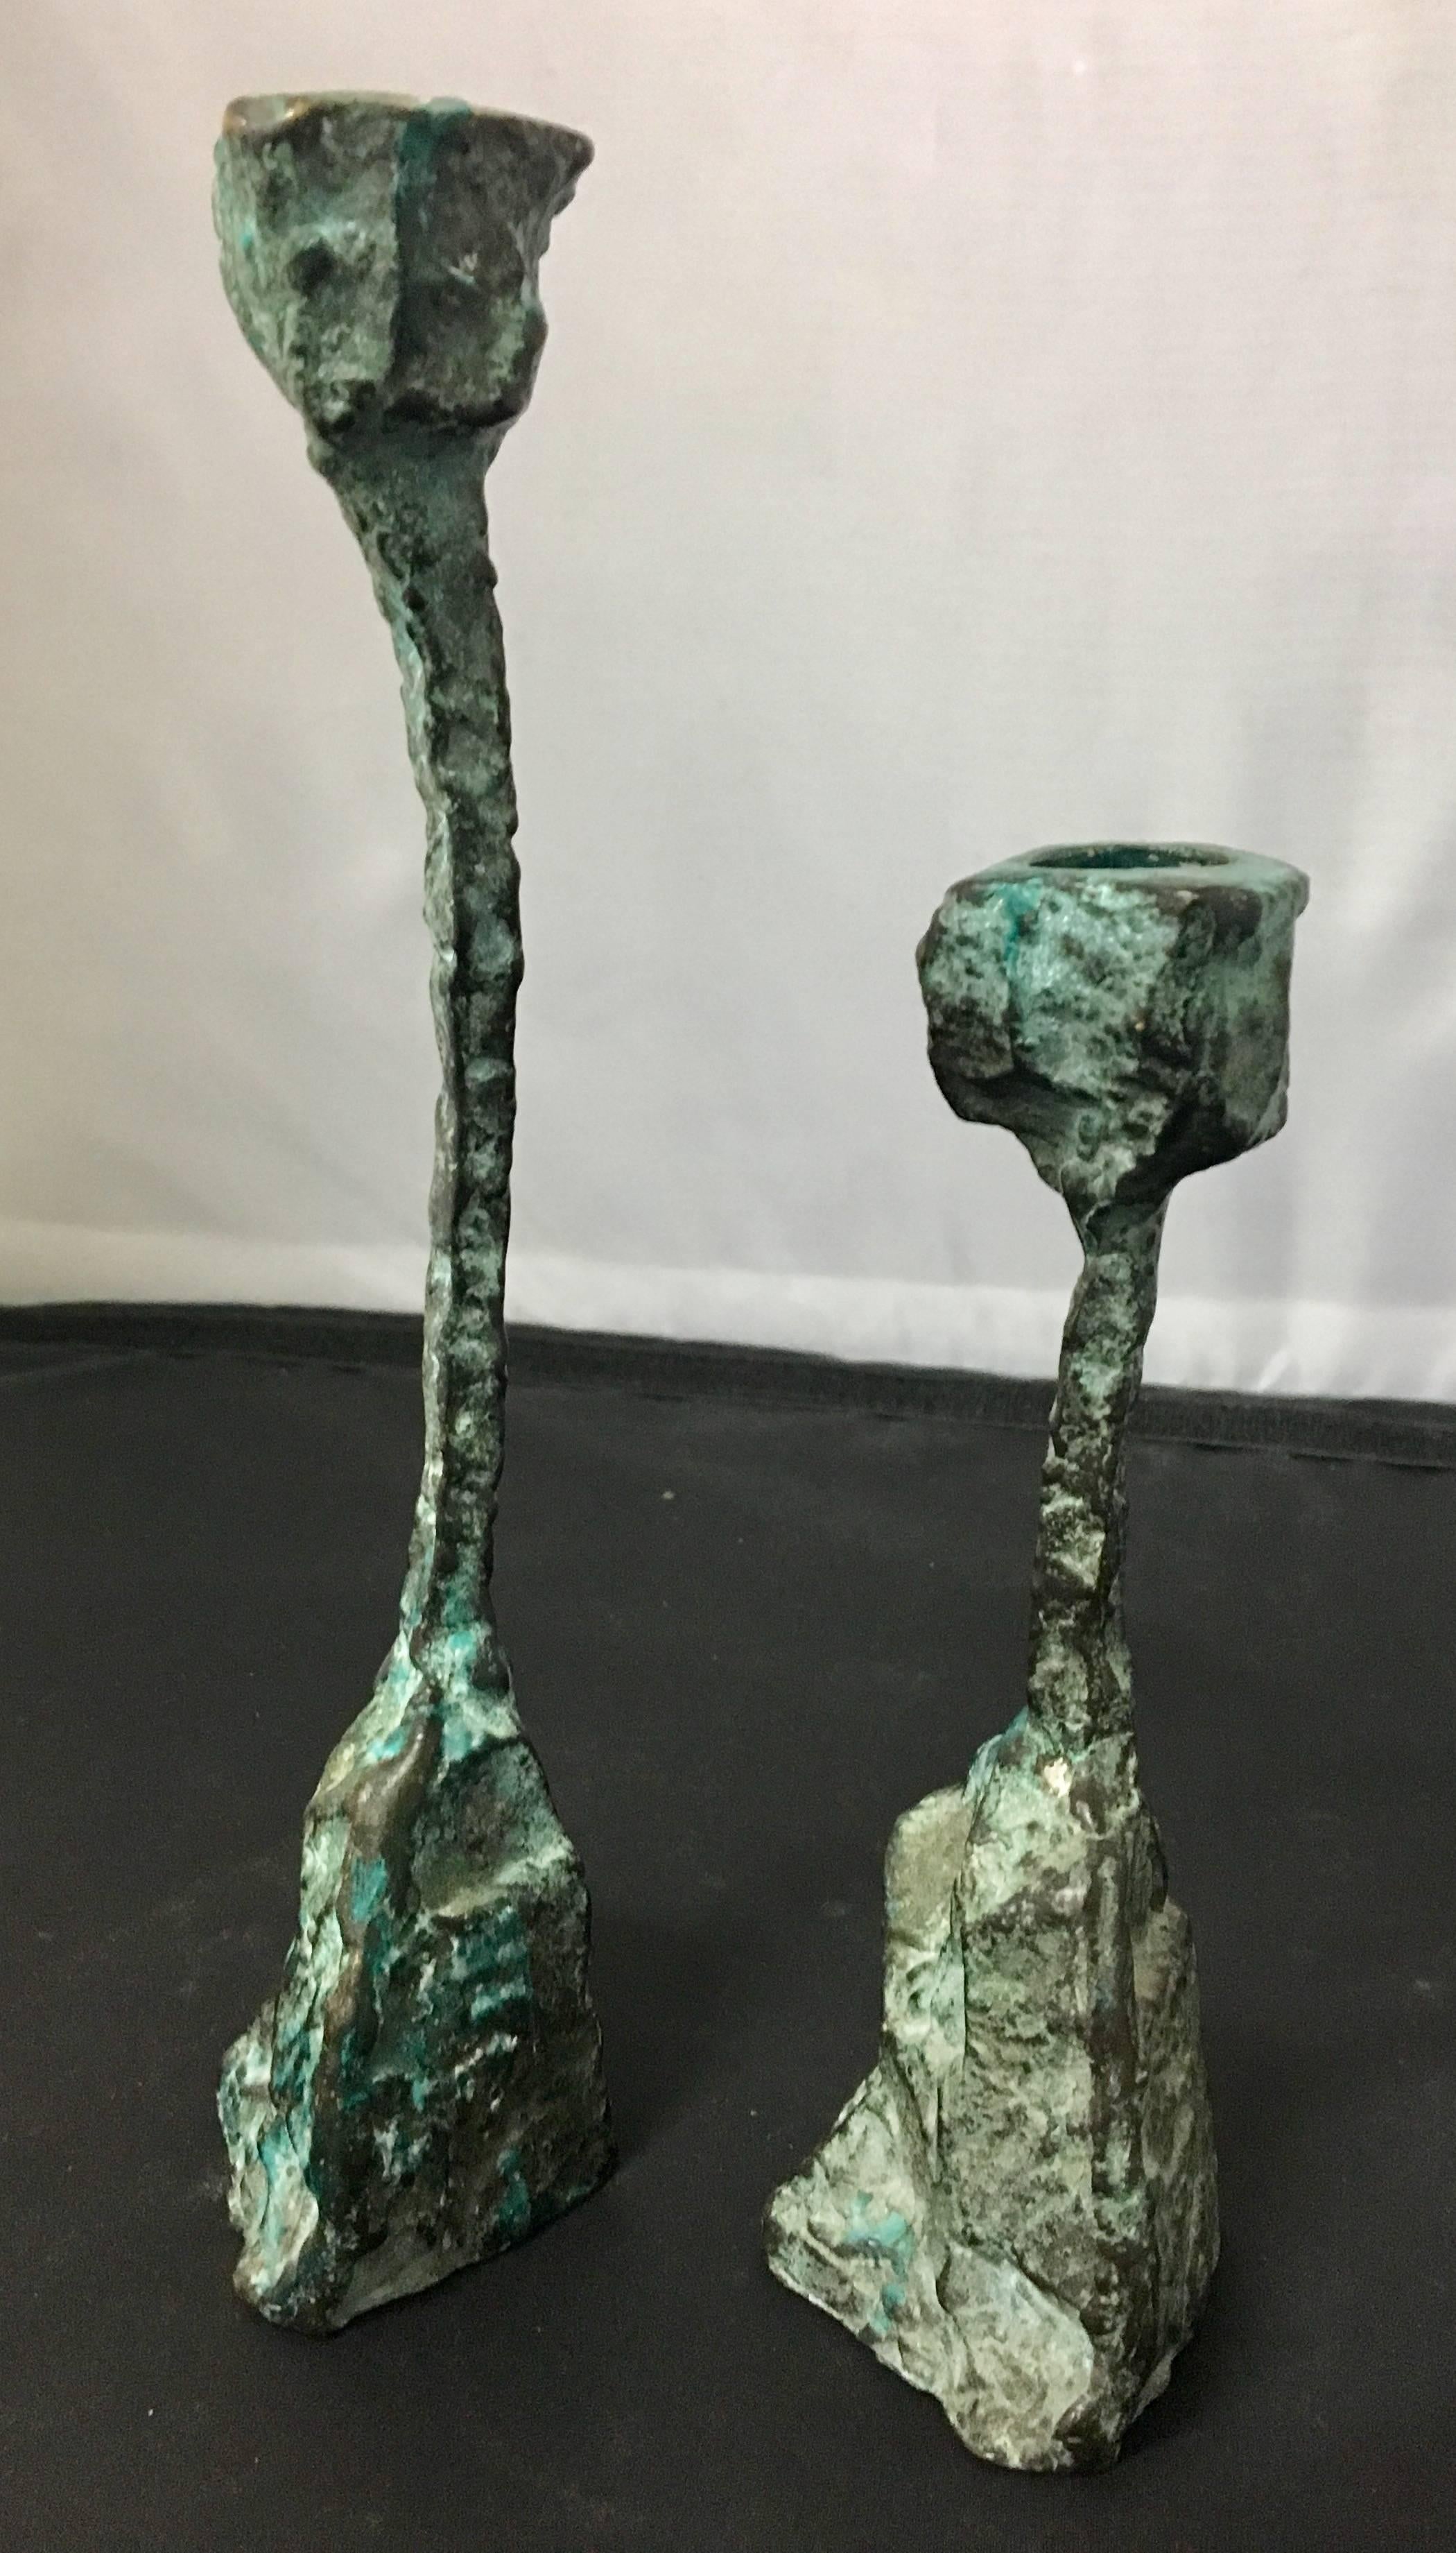 Rare set of Brutalist style candleholders in nice patinated bronze finish. Very unique look in the style of Paul Evans. The tall one is 9.5" high and the shorter one its 6.75" high.